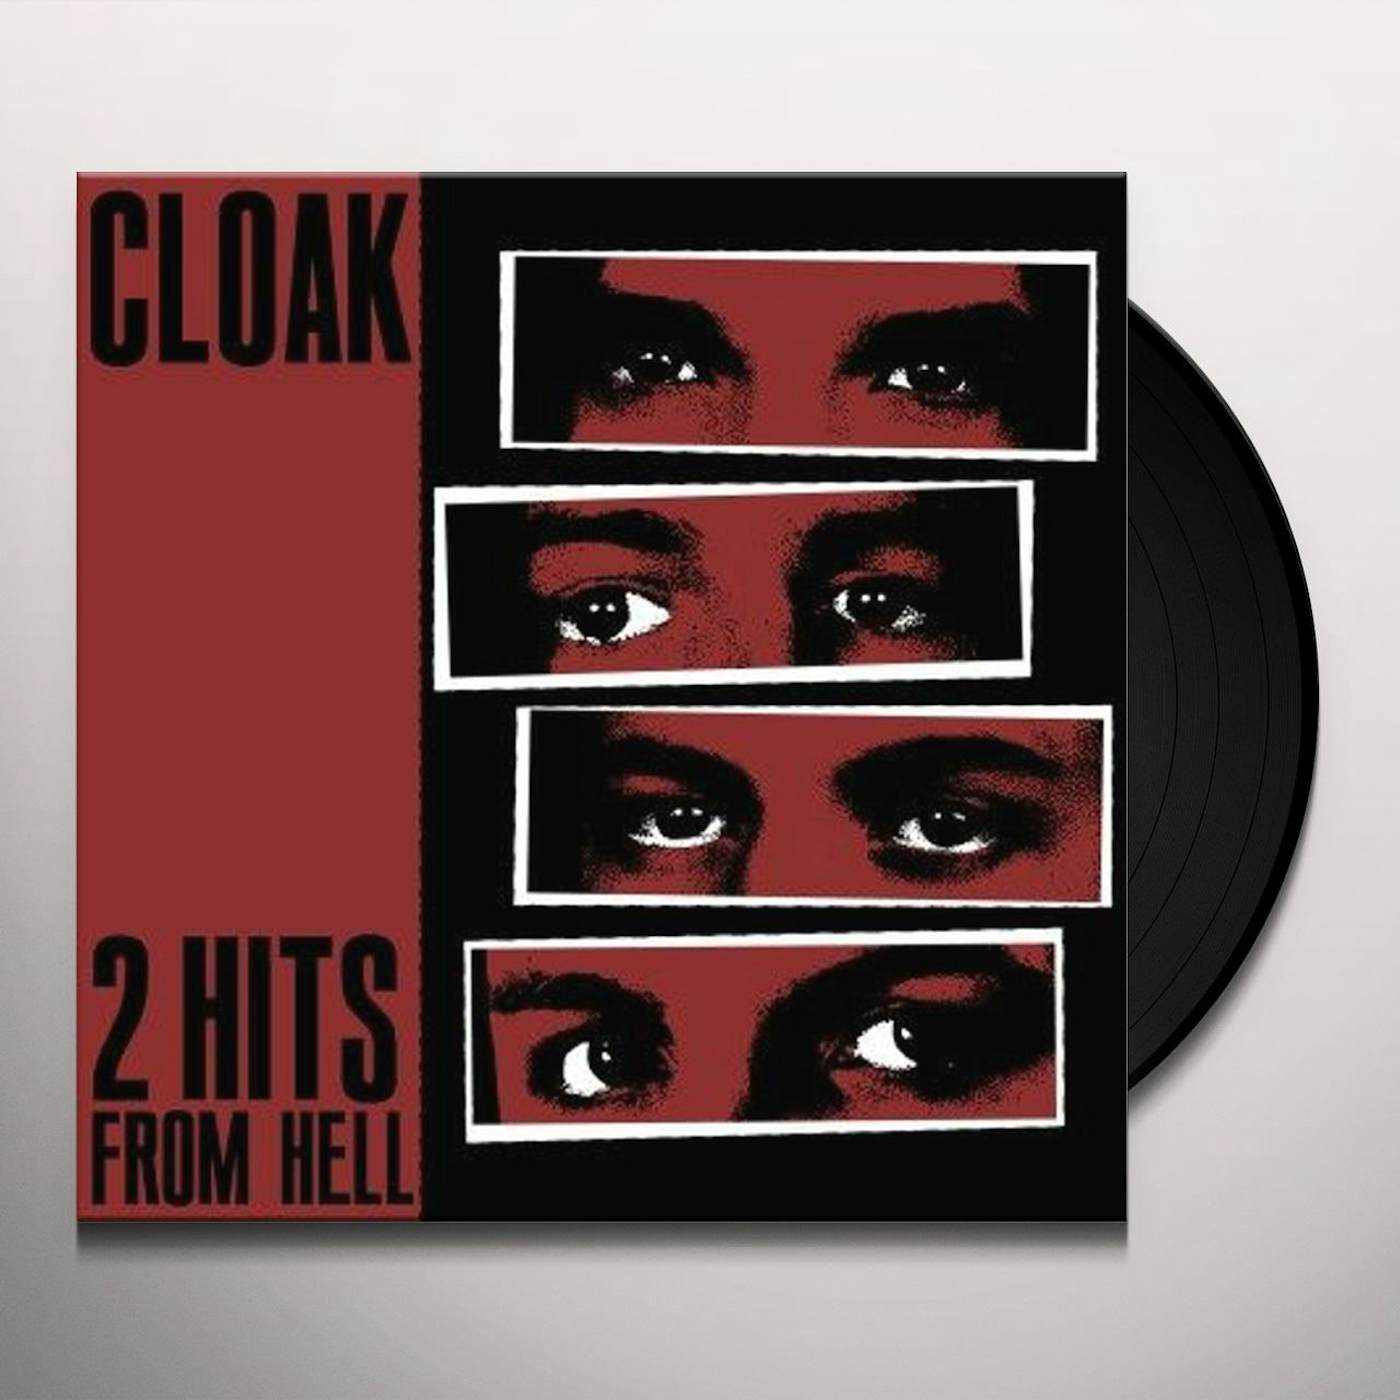 Cloak 2 HITS FROM HELL Vinyl Record